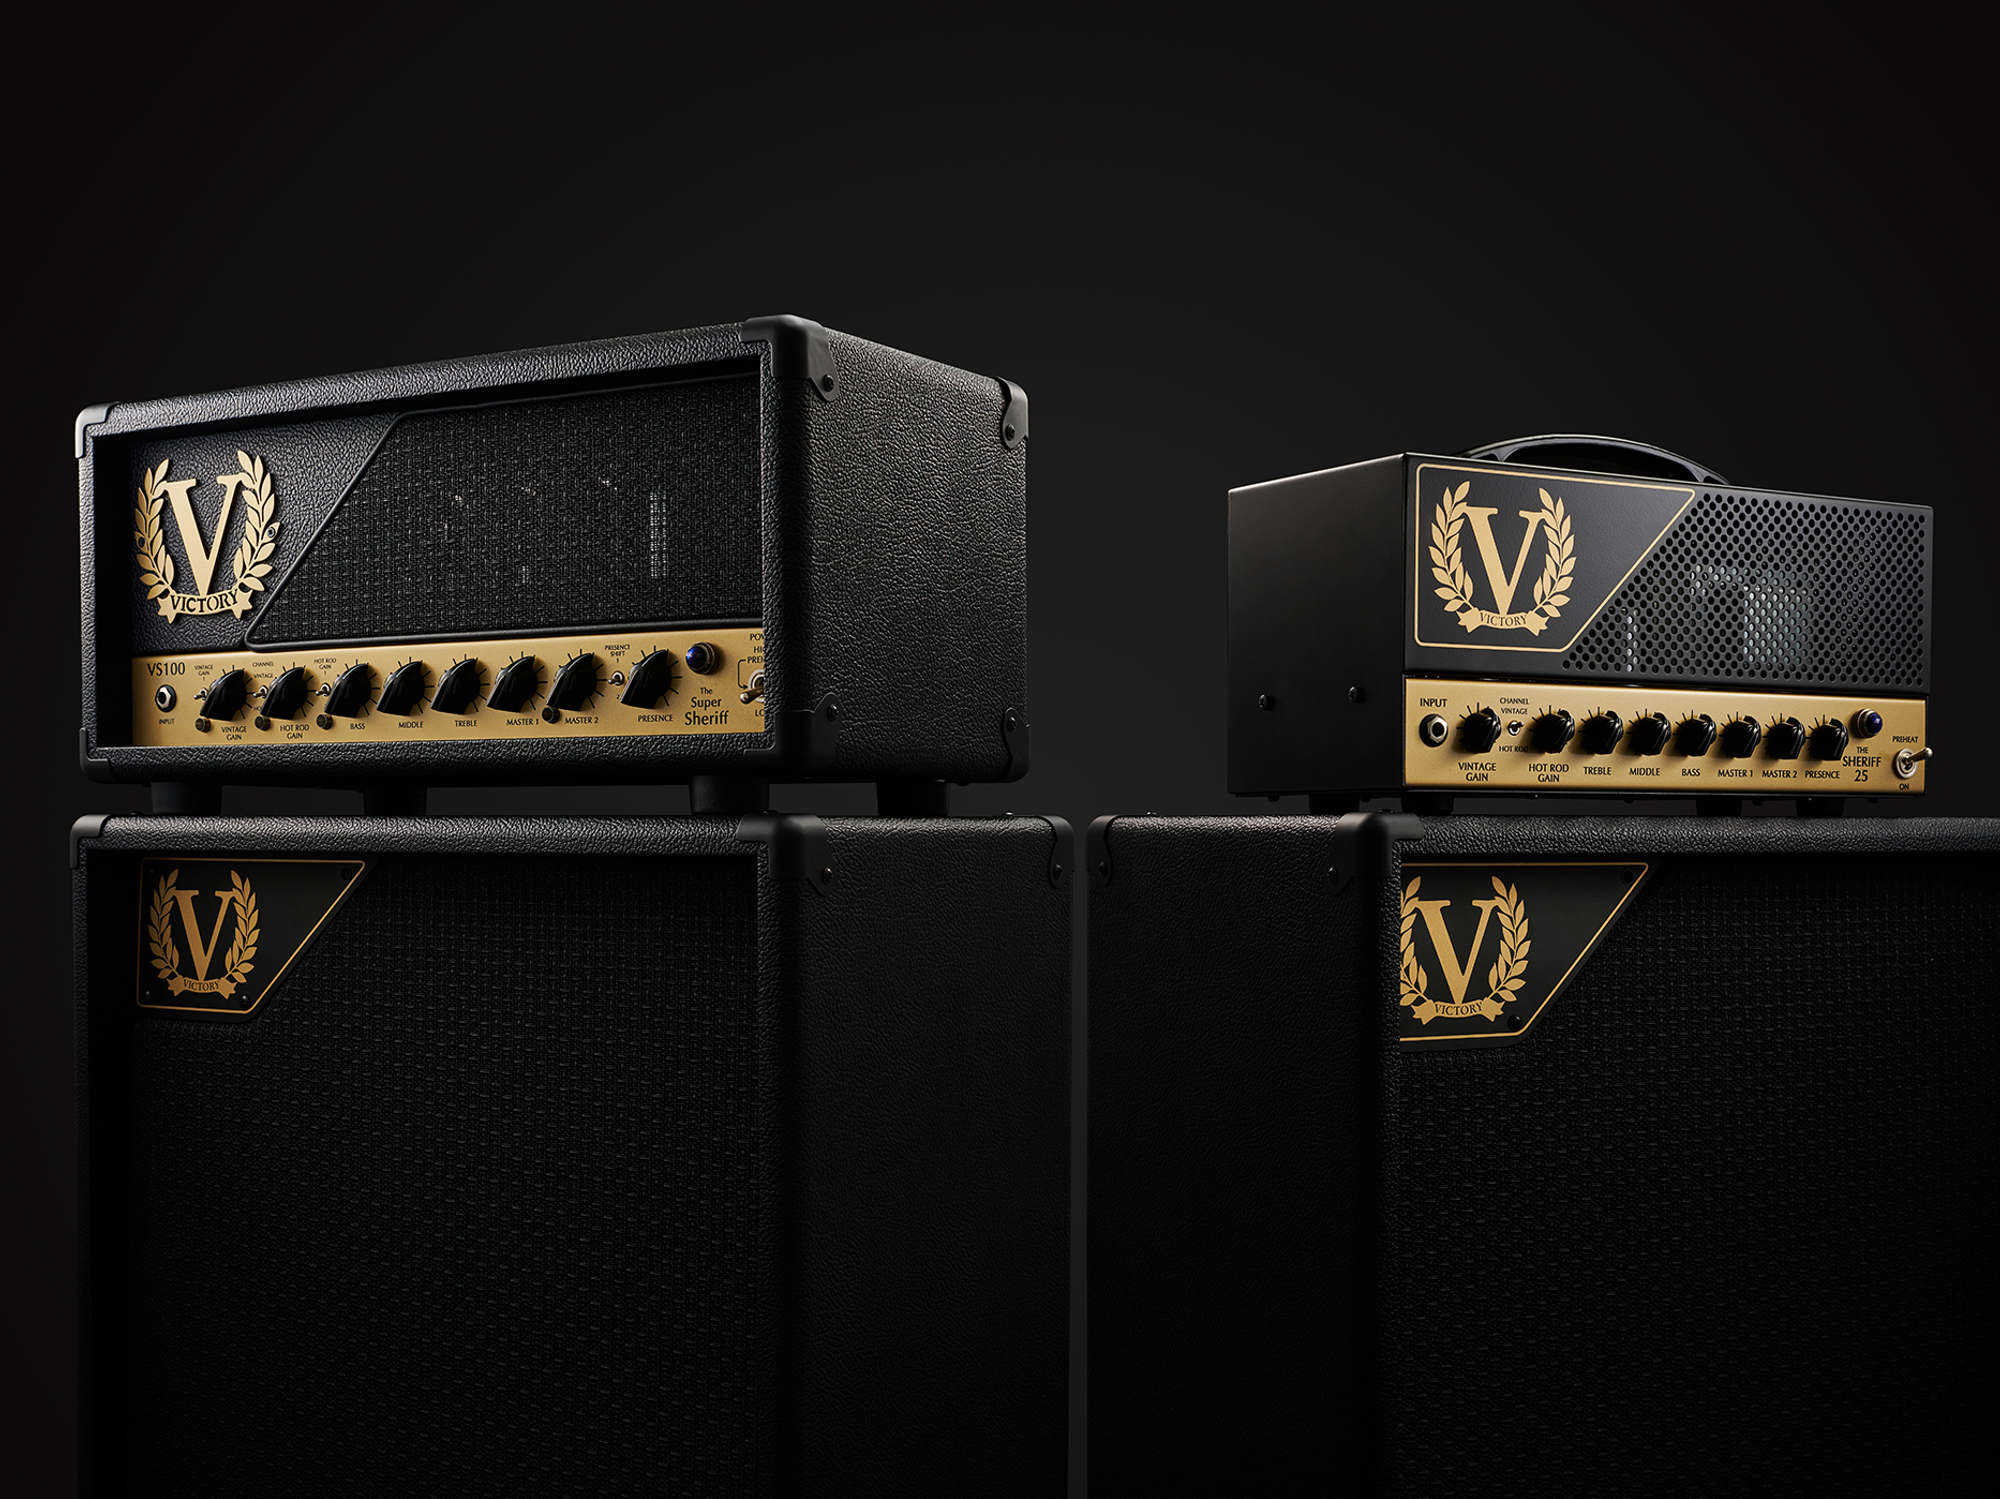 Victory Amps Announces the Sheriff 25 and VS100 Super Sheriff